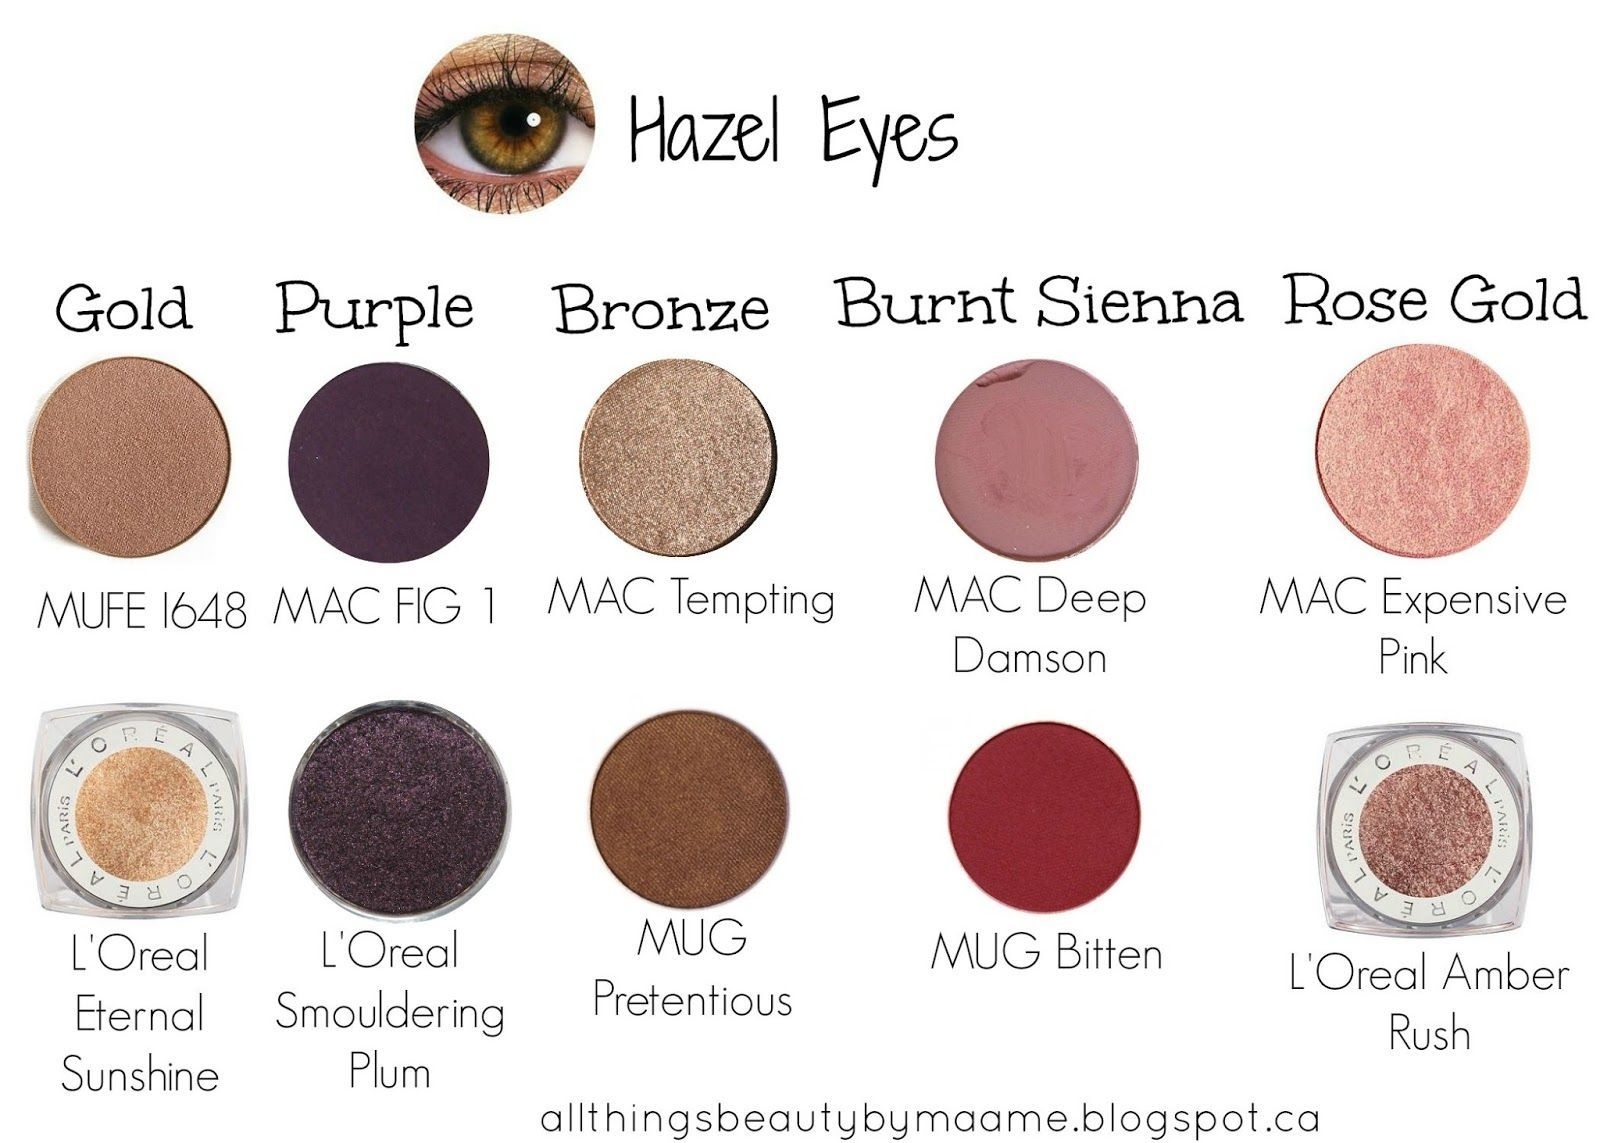 Beauty Guide : Best Eyeshadows For Your Eye Colour - All Things pertaining to Mac Makeup For Hazel Eyes